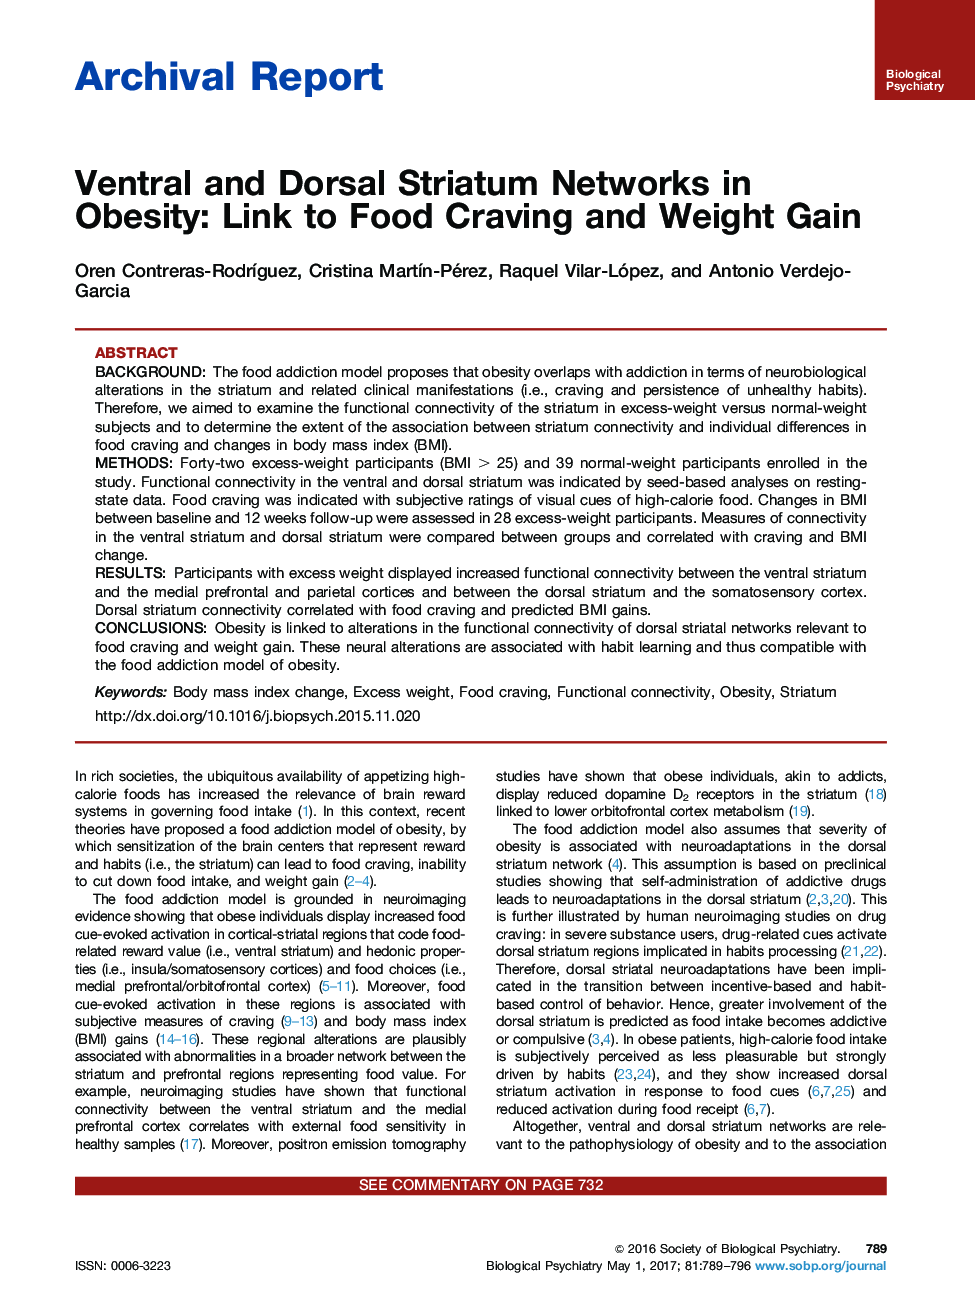 Archival ReportVentral and Dorsal Striatum Networks in Obesity: Link to Food Craving and Weight Gain